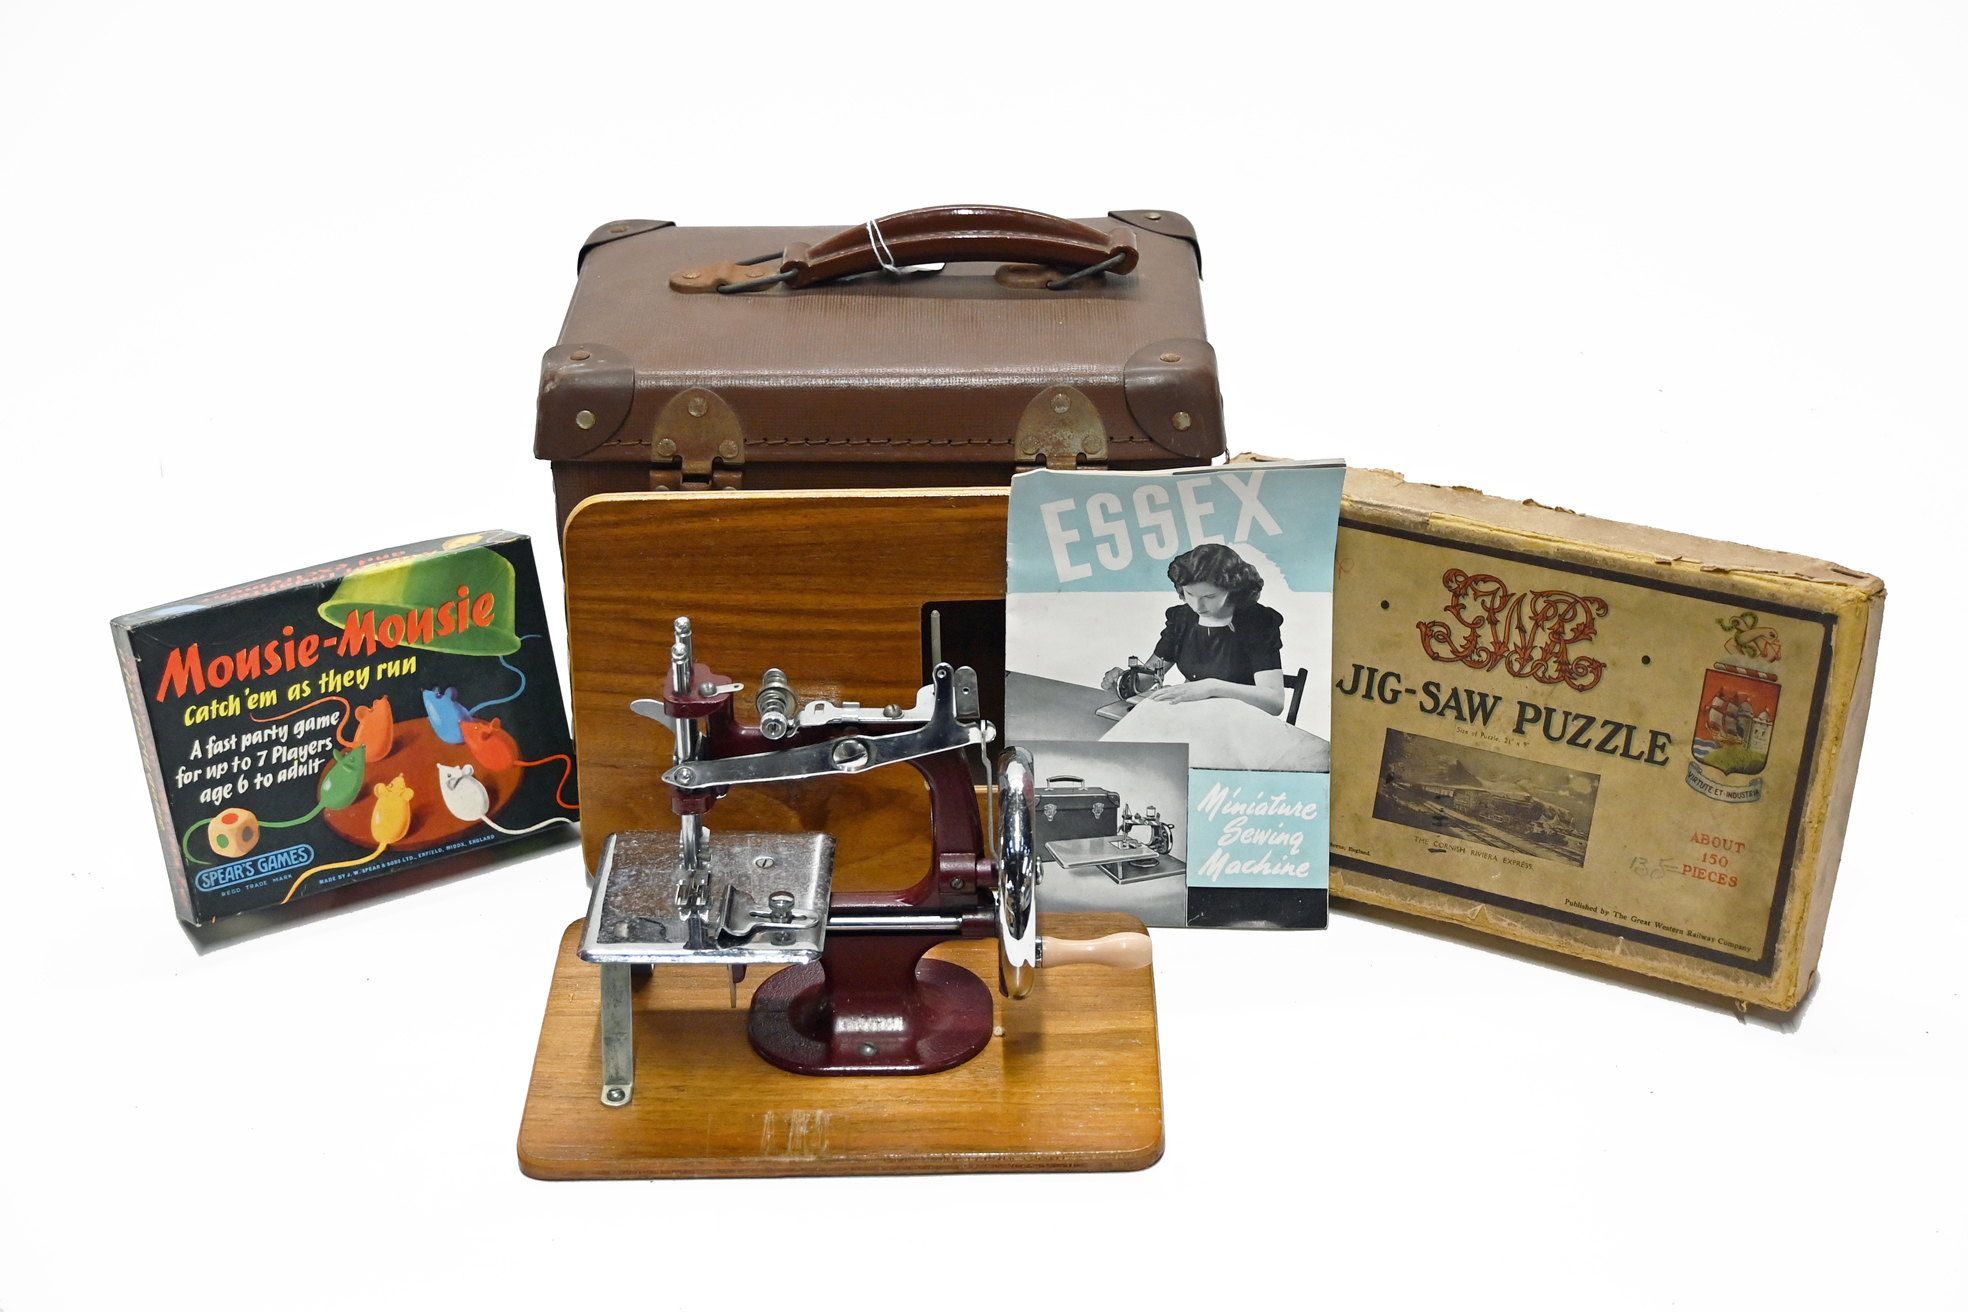 An Essex miniature sewing machine with cardboard box and case,